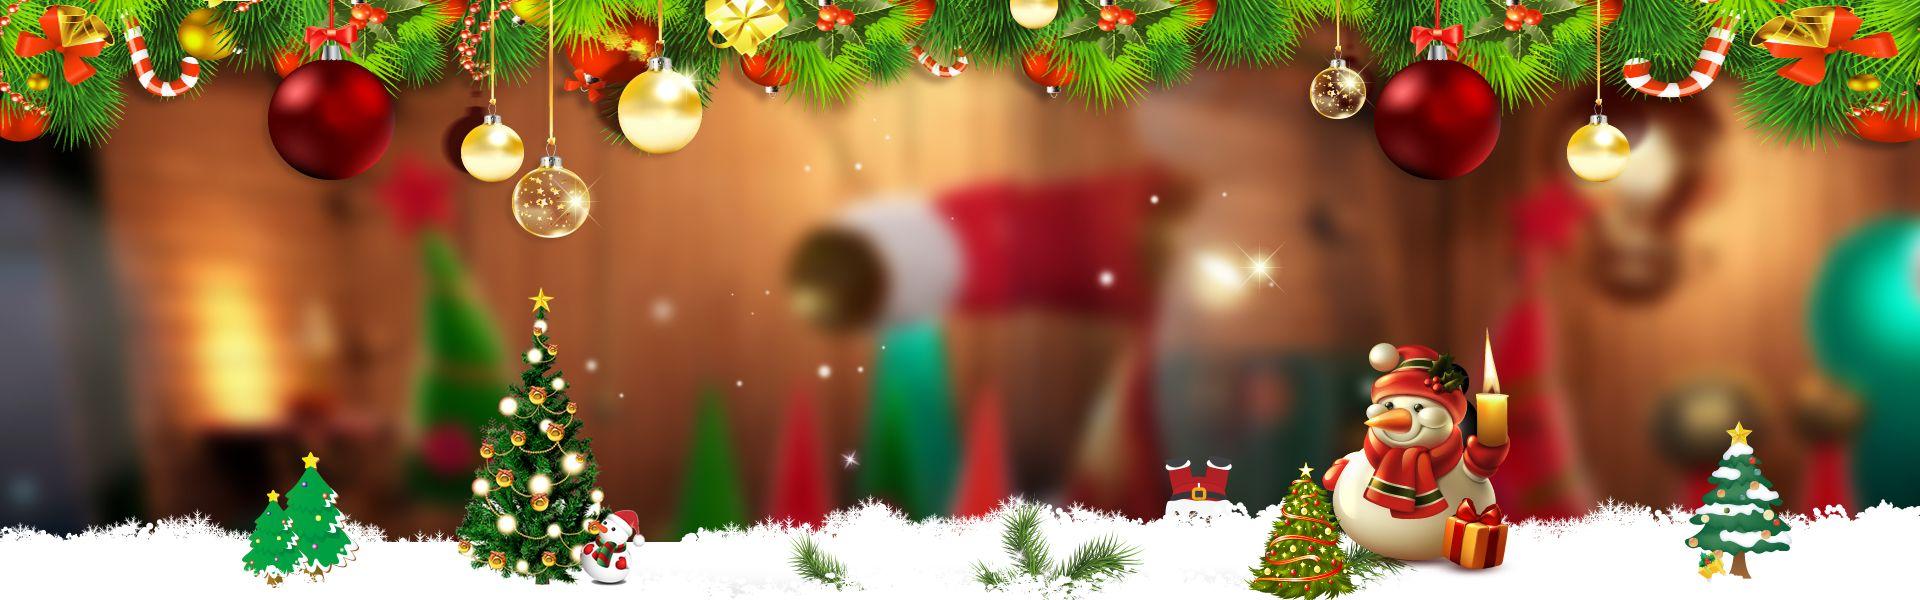 Hd Banner Christmas Background. Christmas background